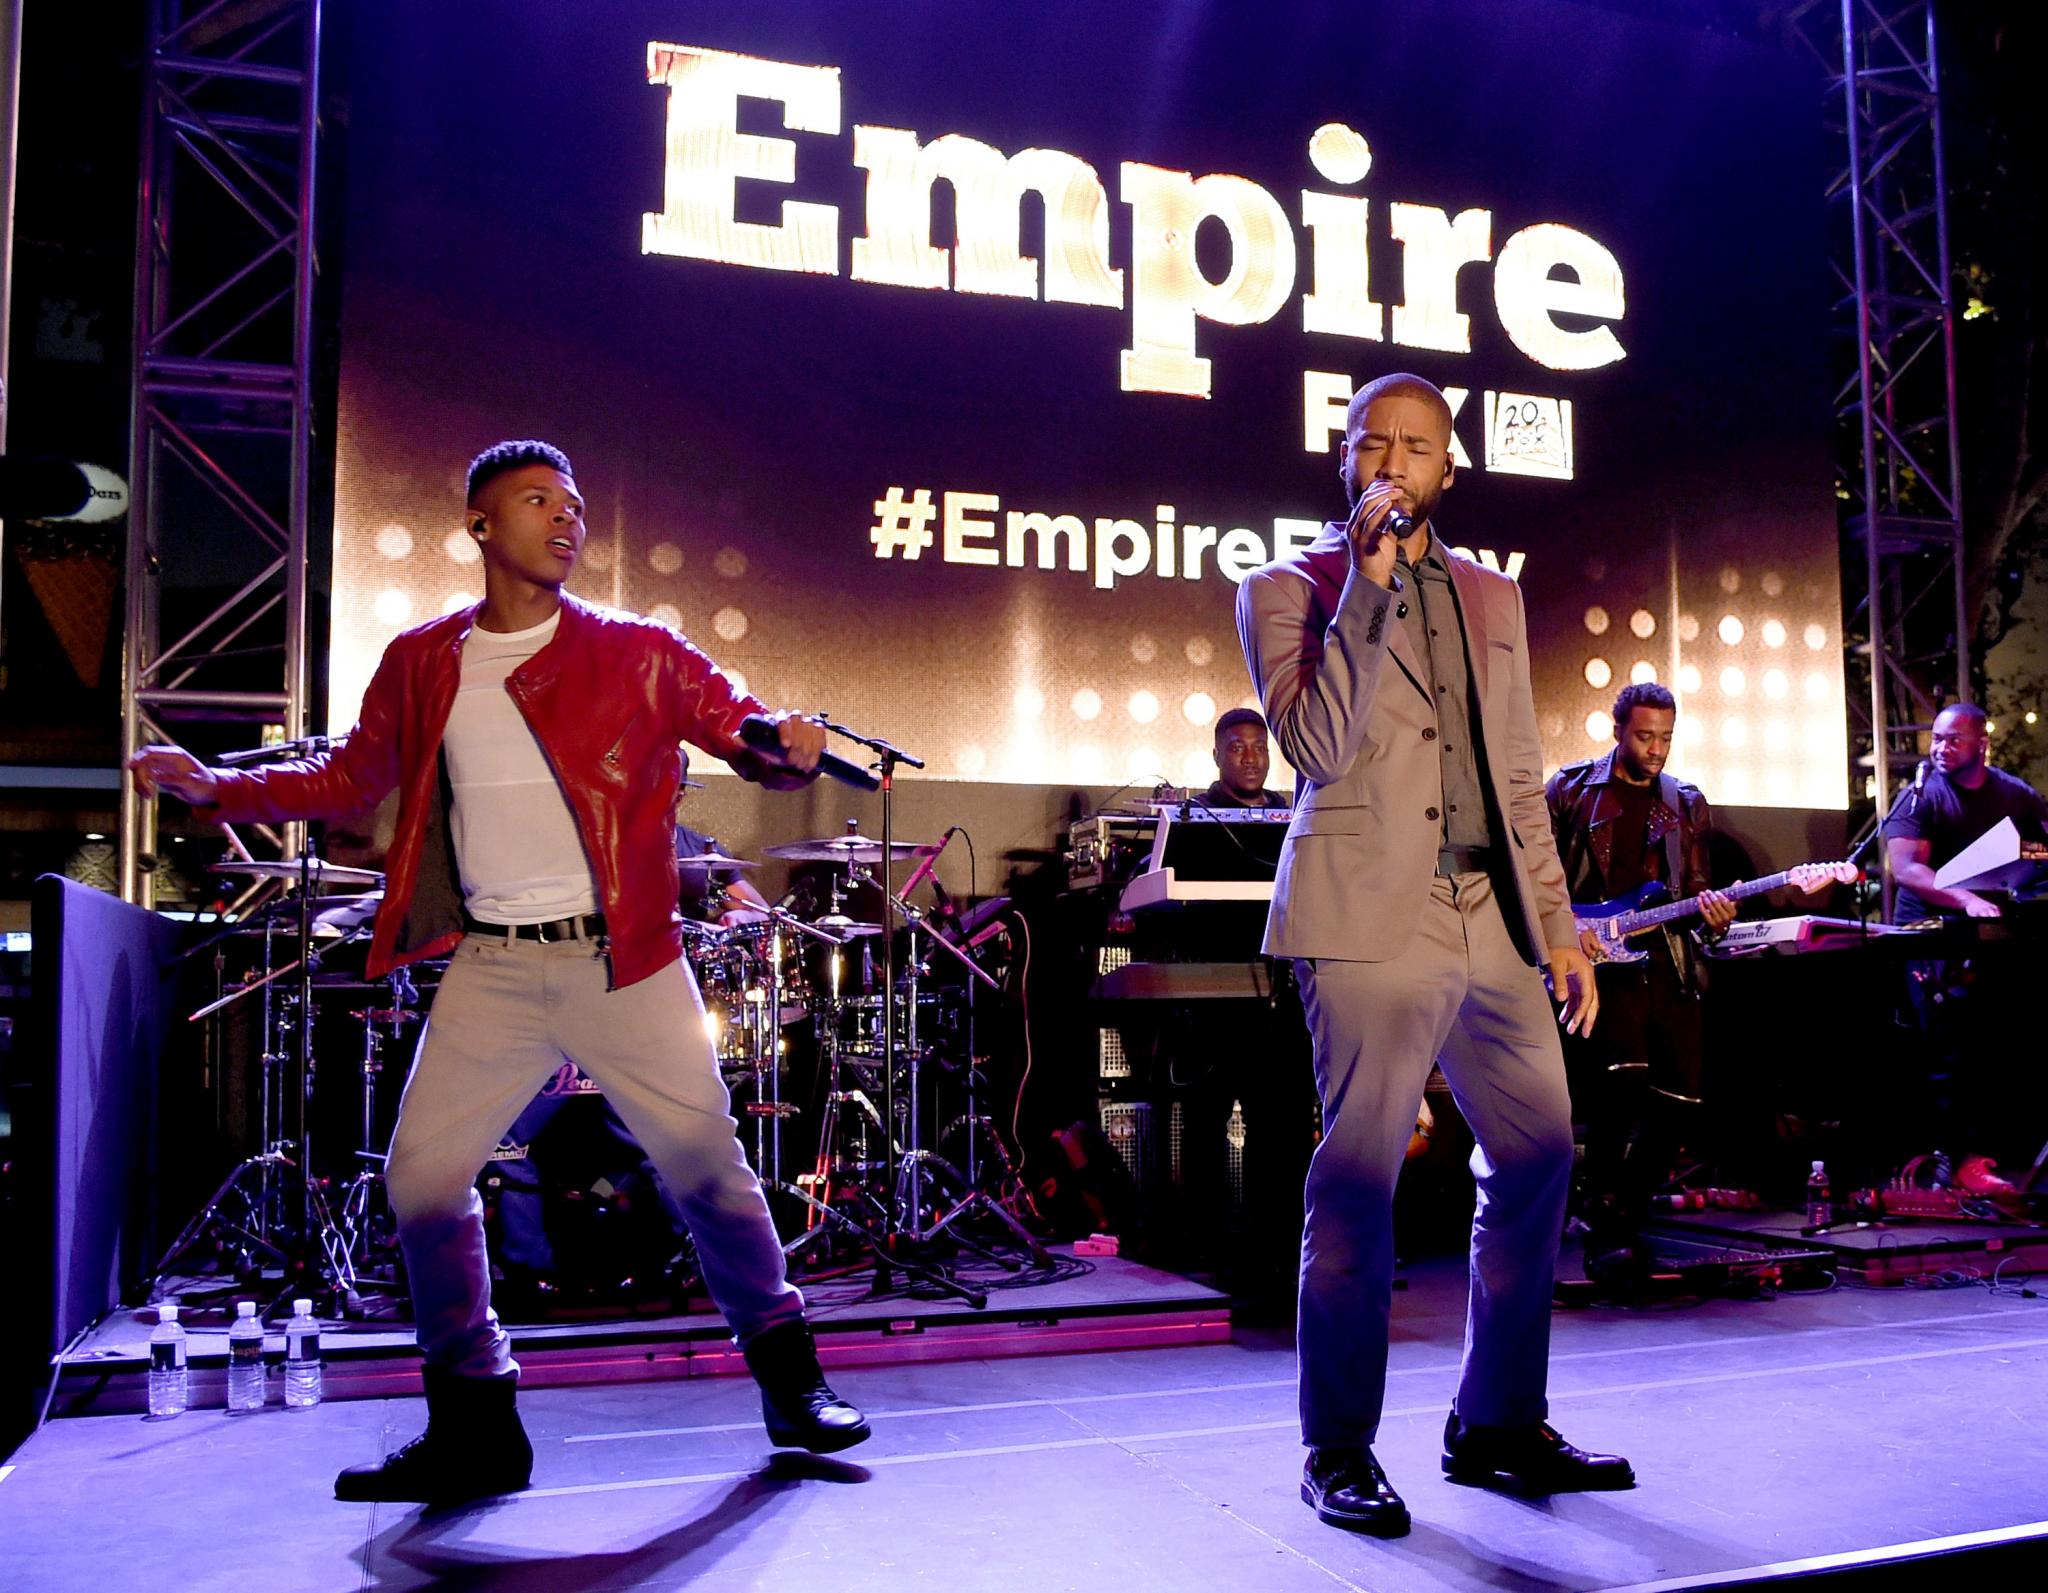 Watch An Extended Version of 'No Apologies' Music Video from 'Empire'
